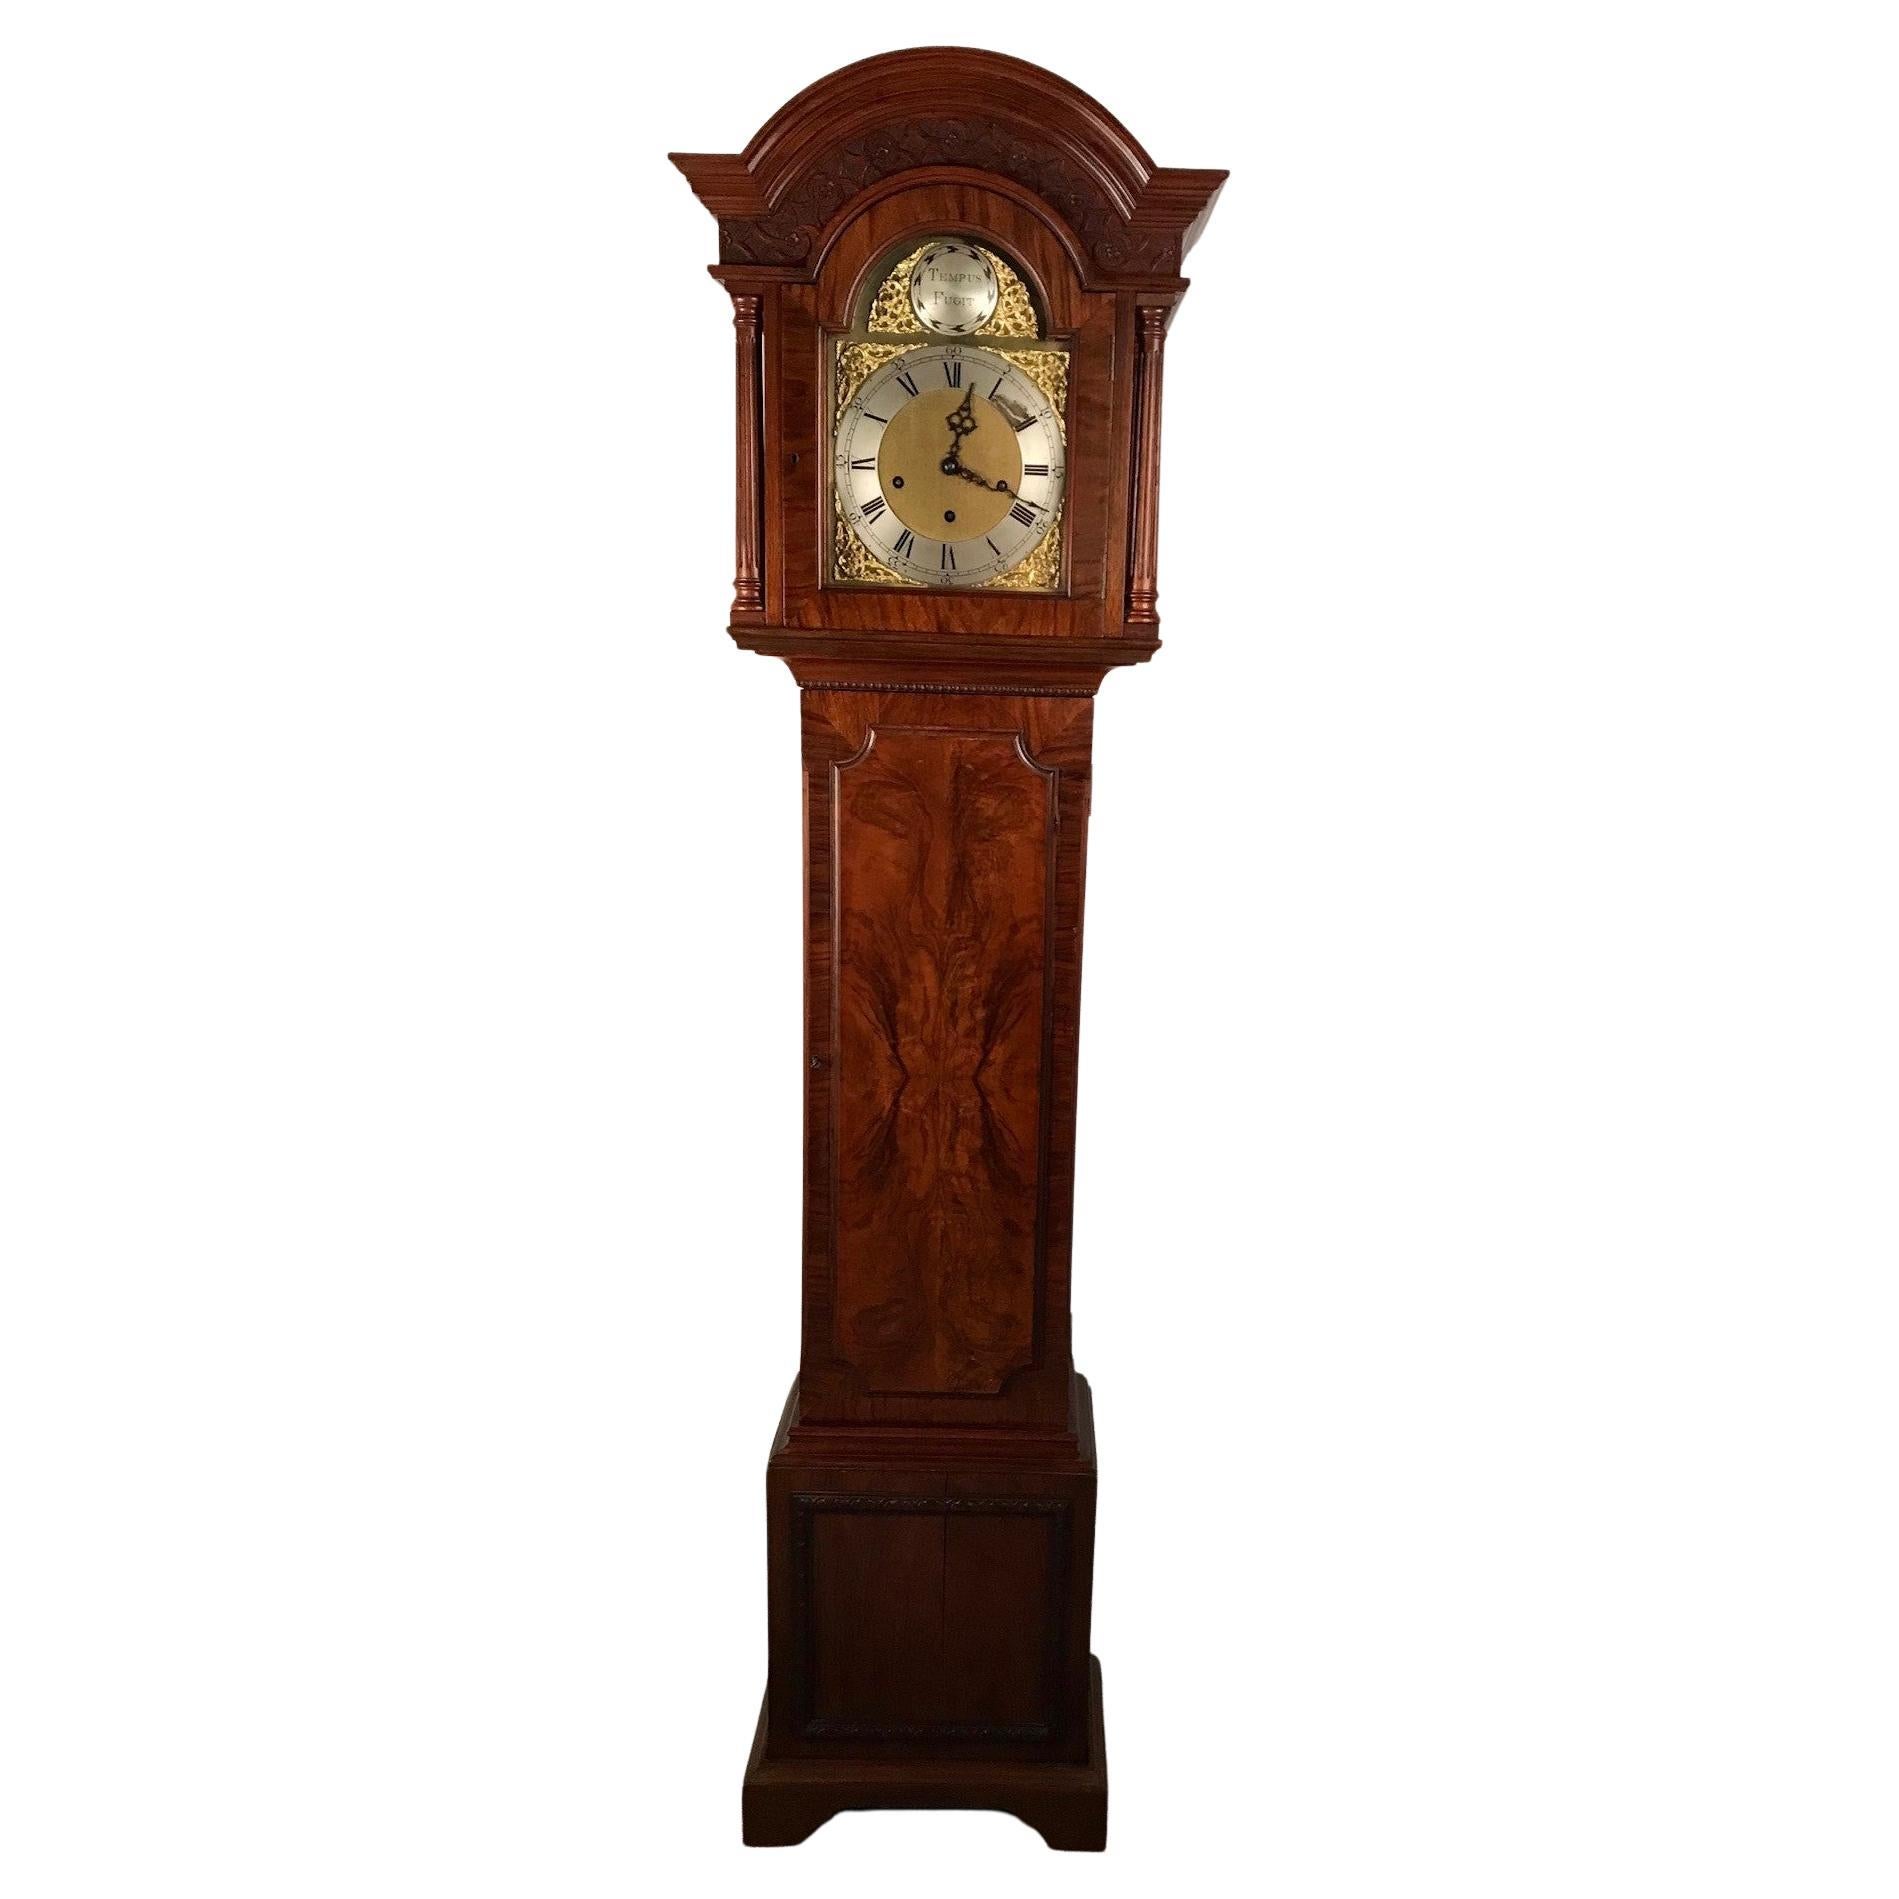 How does a longcase clock work?